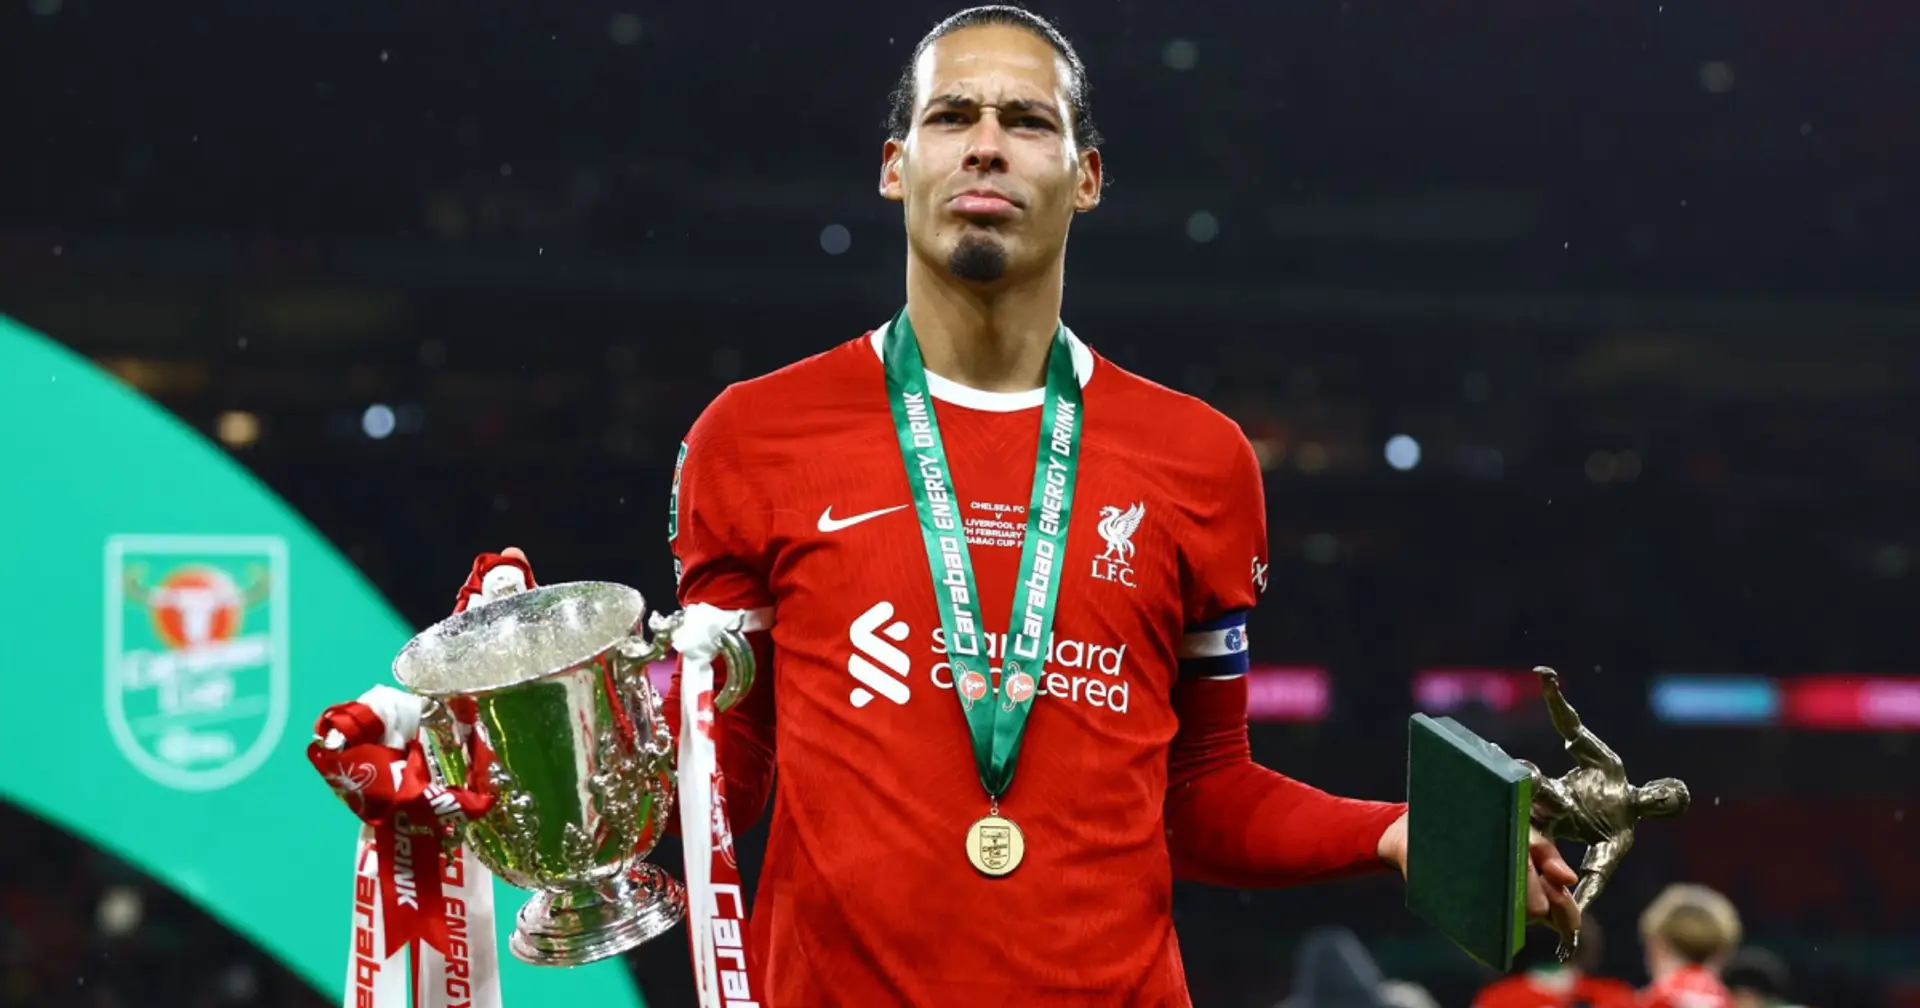 'We would’ve been a good pairing': Man City legend explains why he would like to play alongside Van Dijk